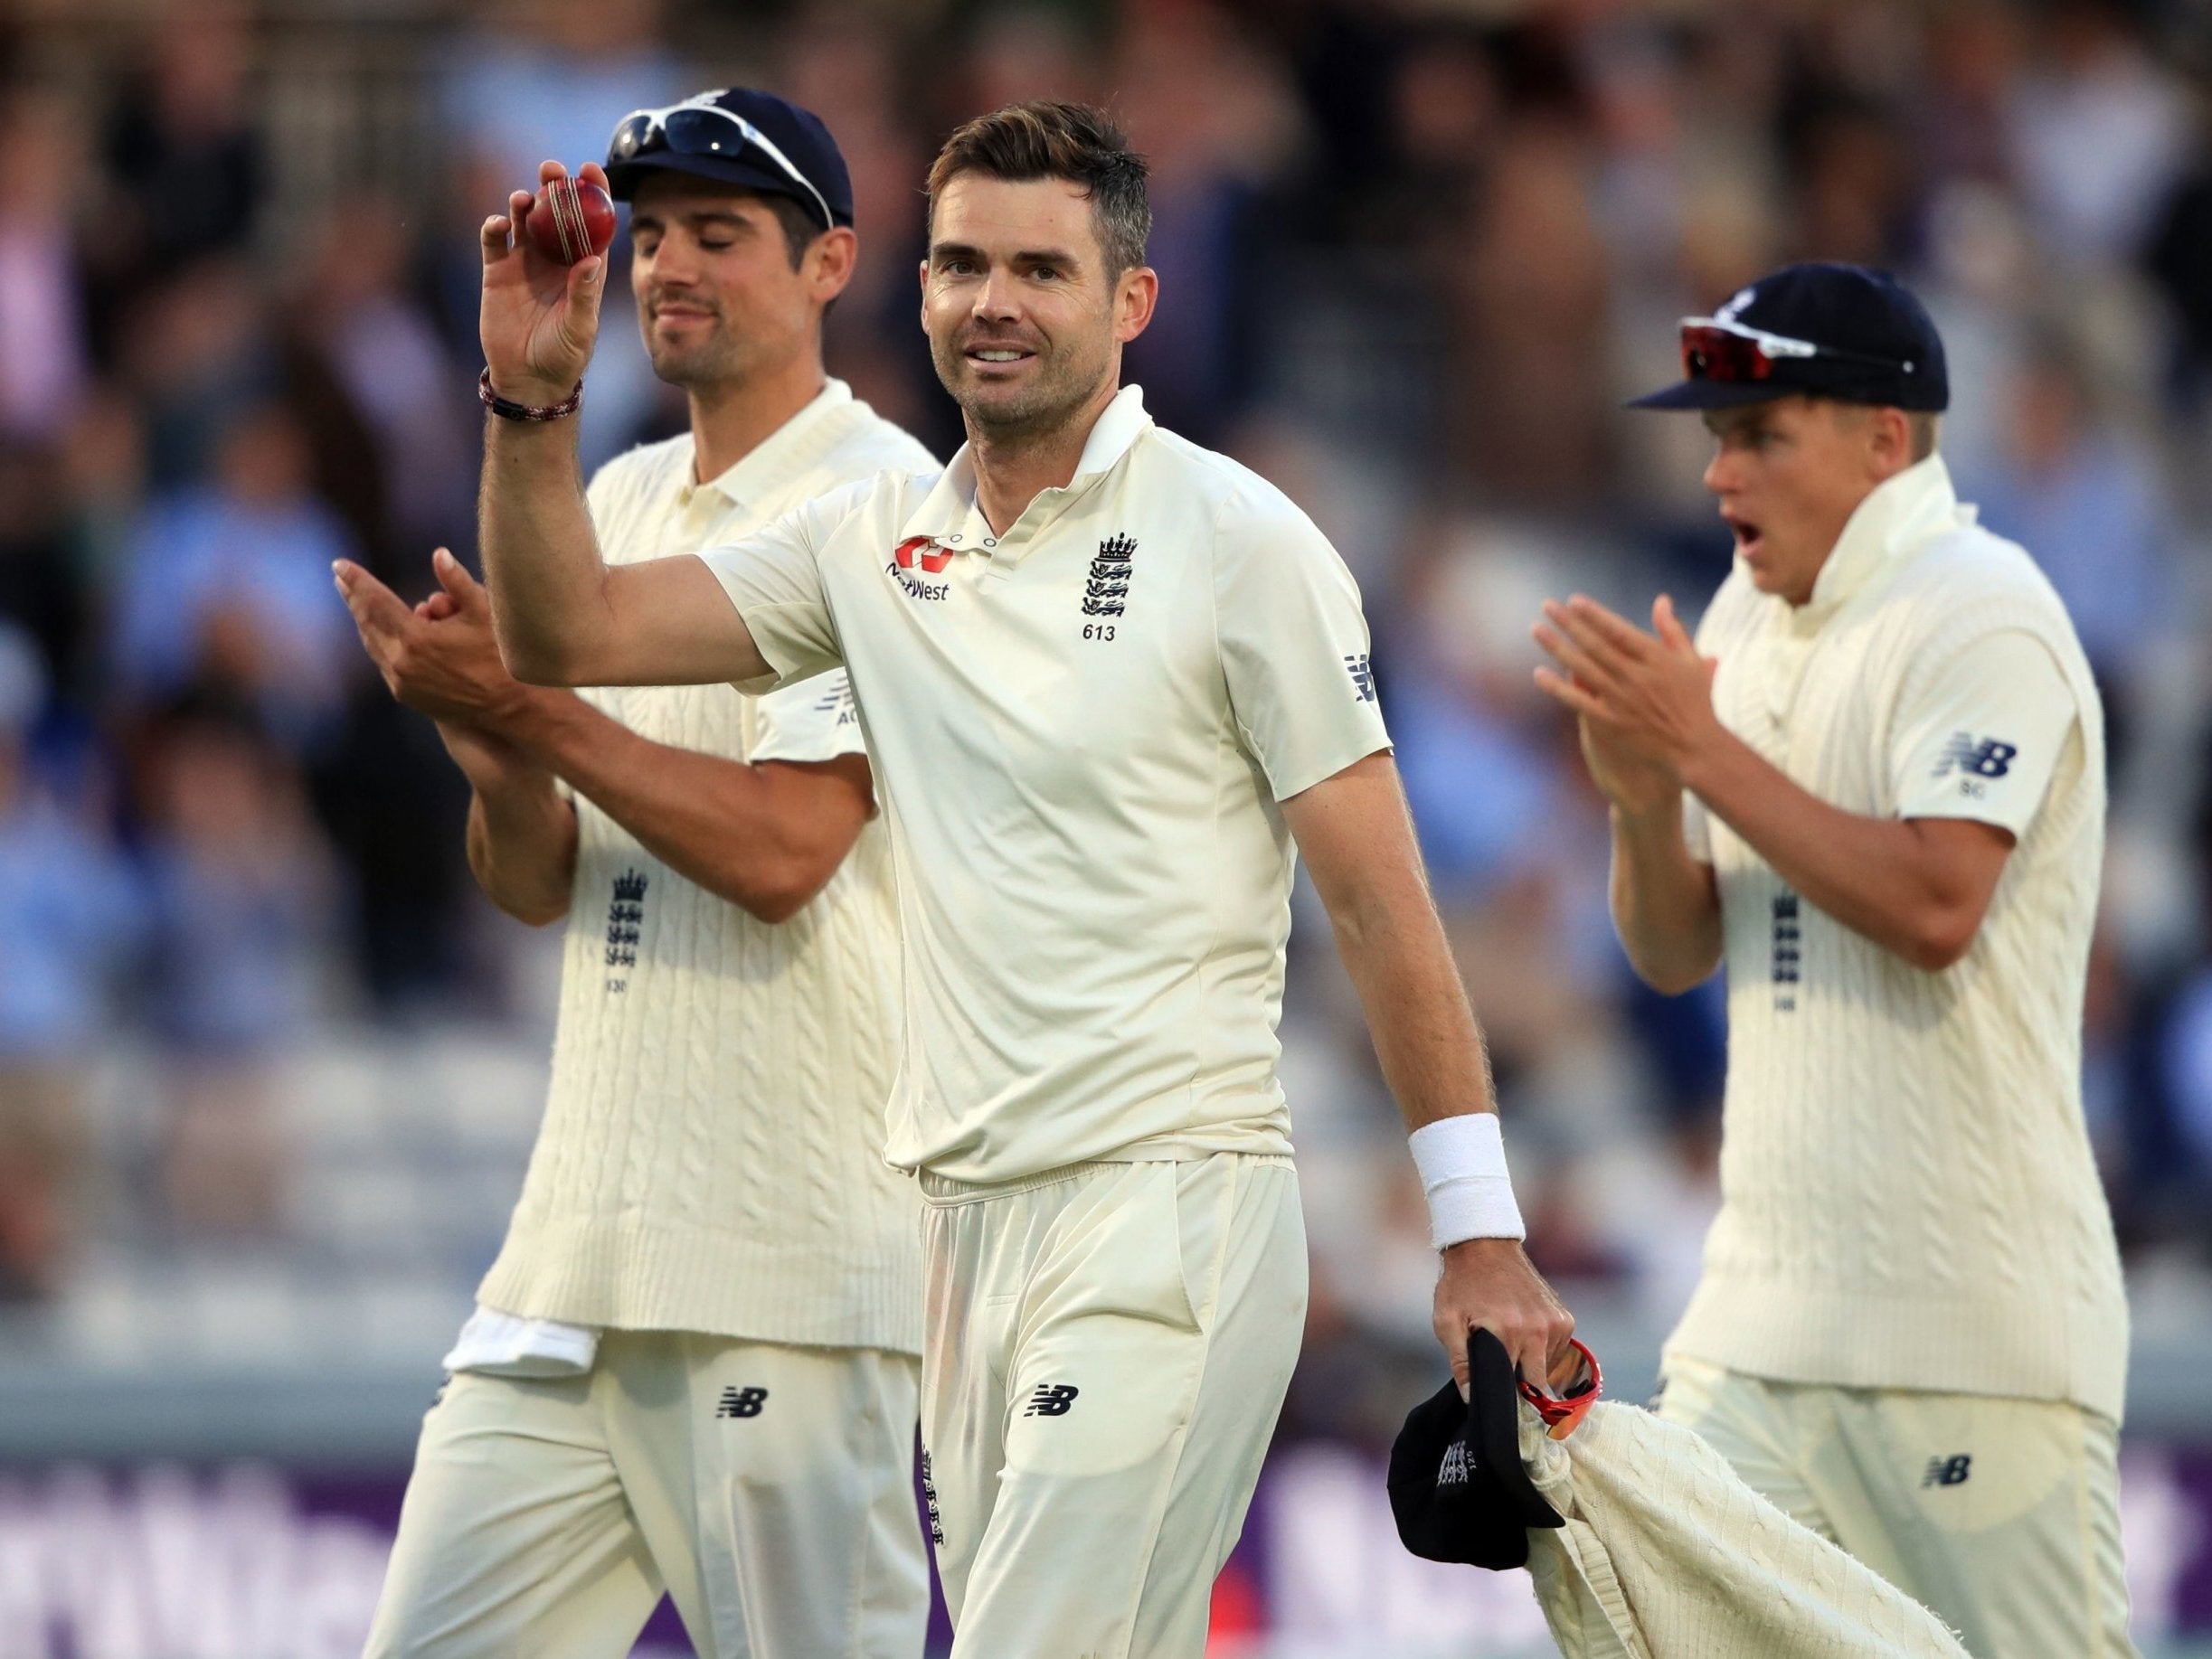 Anderson remains England's standout bowler